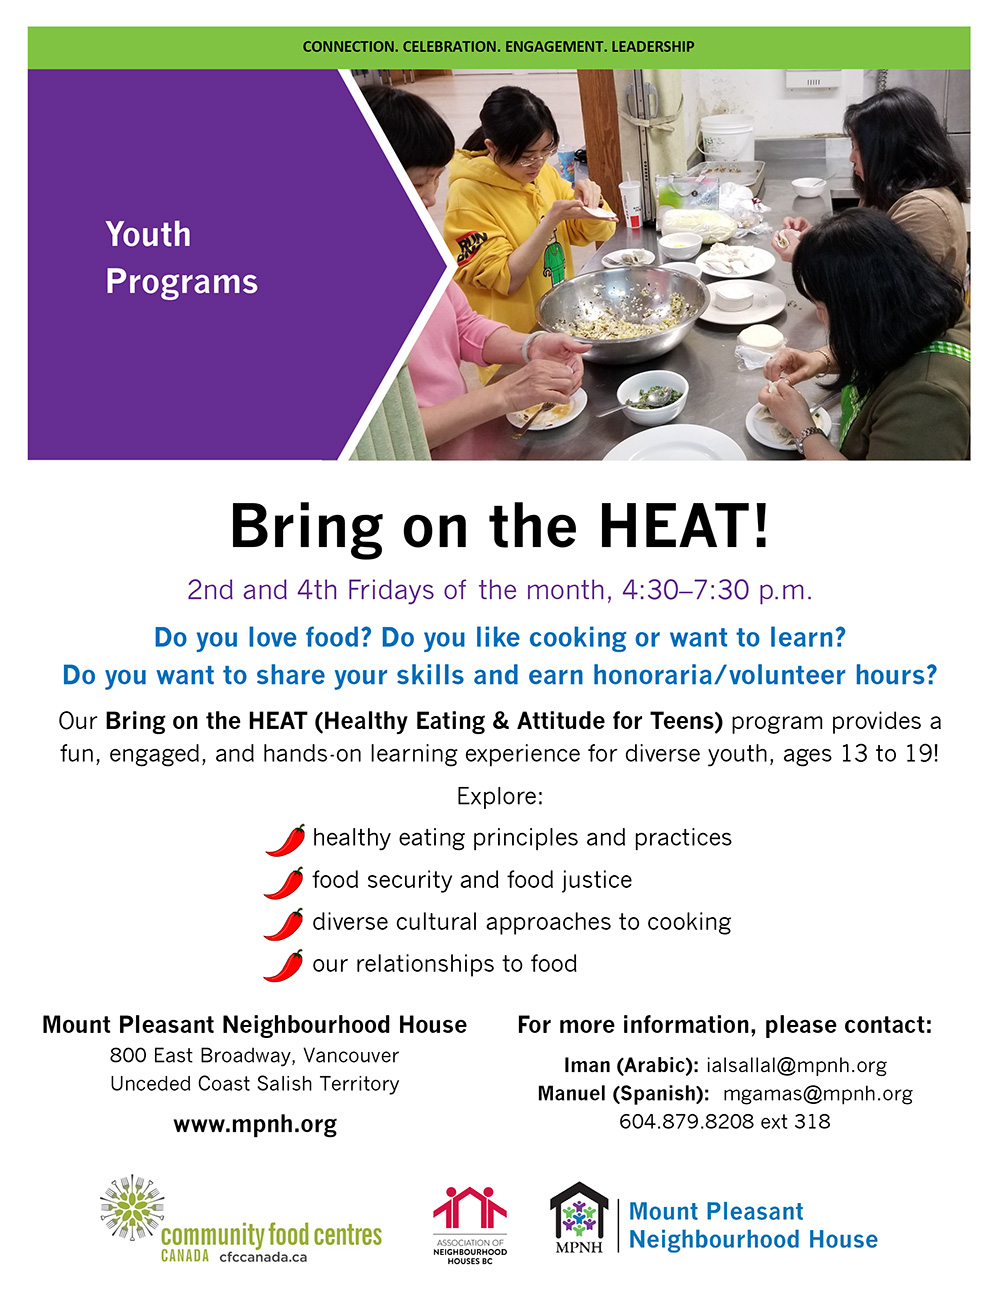 Poster for Bring on the HEAT! showing youth making food together